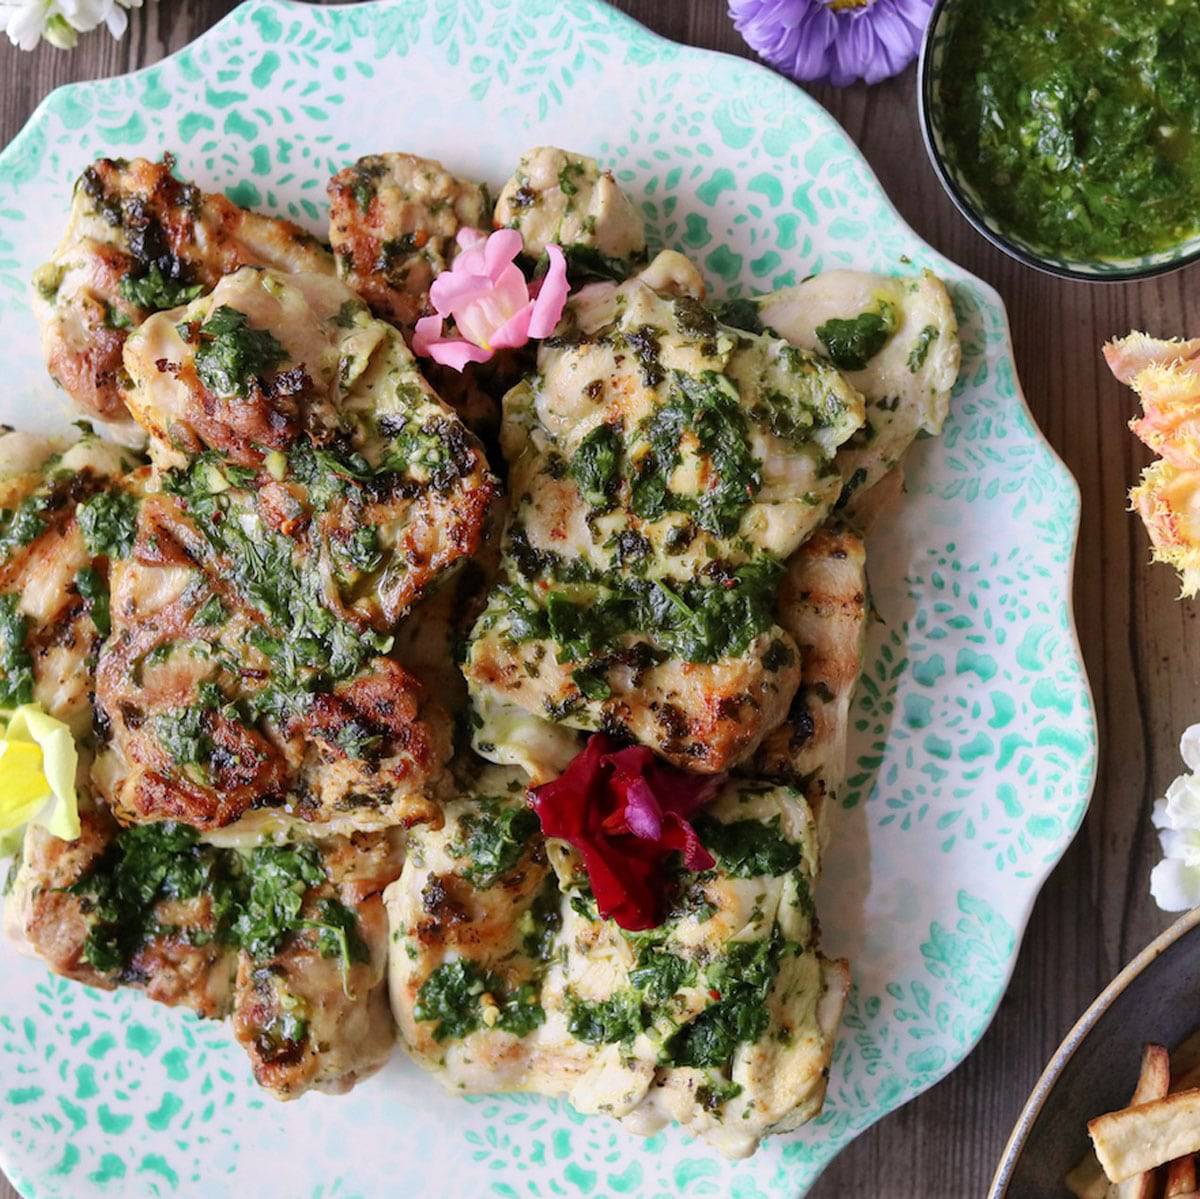 Pan fried chicken thighs with chimichurri